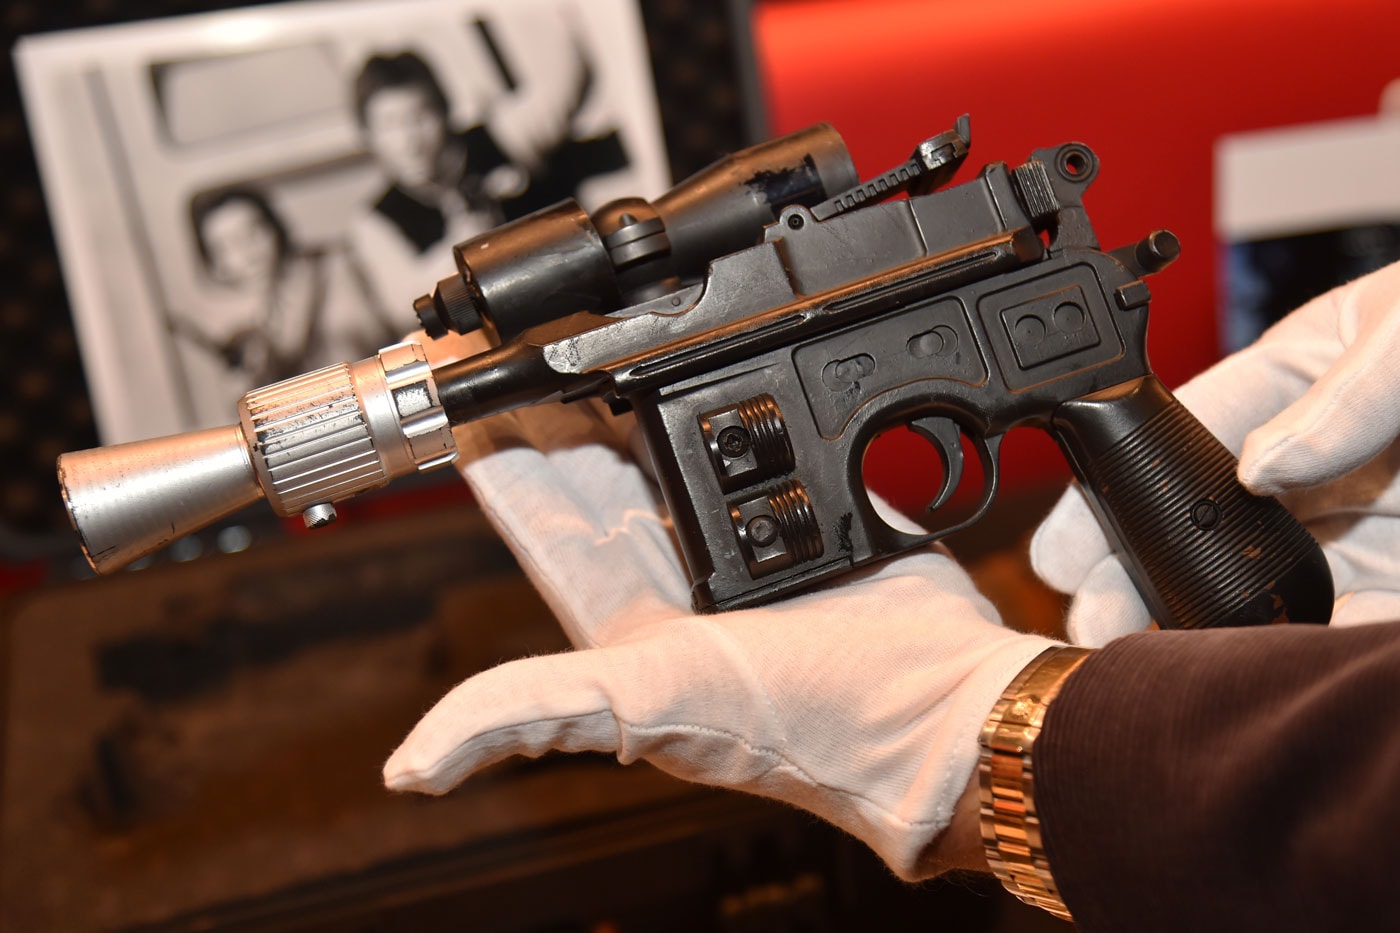 Han Solo star wars A New Hope Blaster Auction 1 million USD harrison ford 